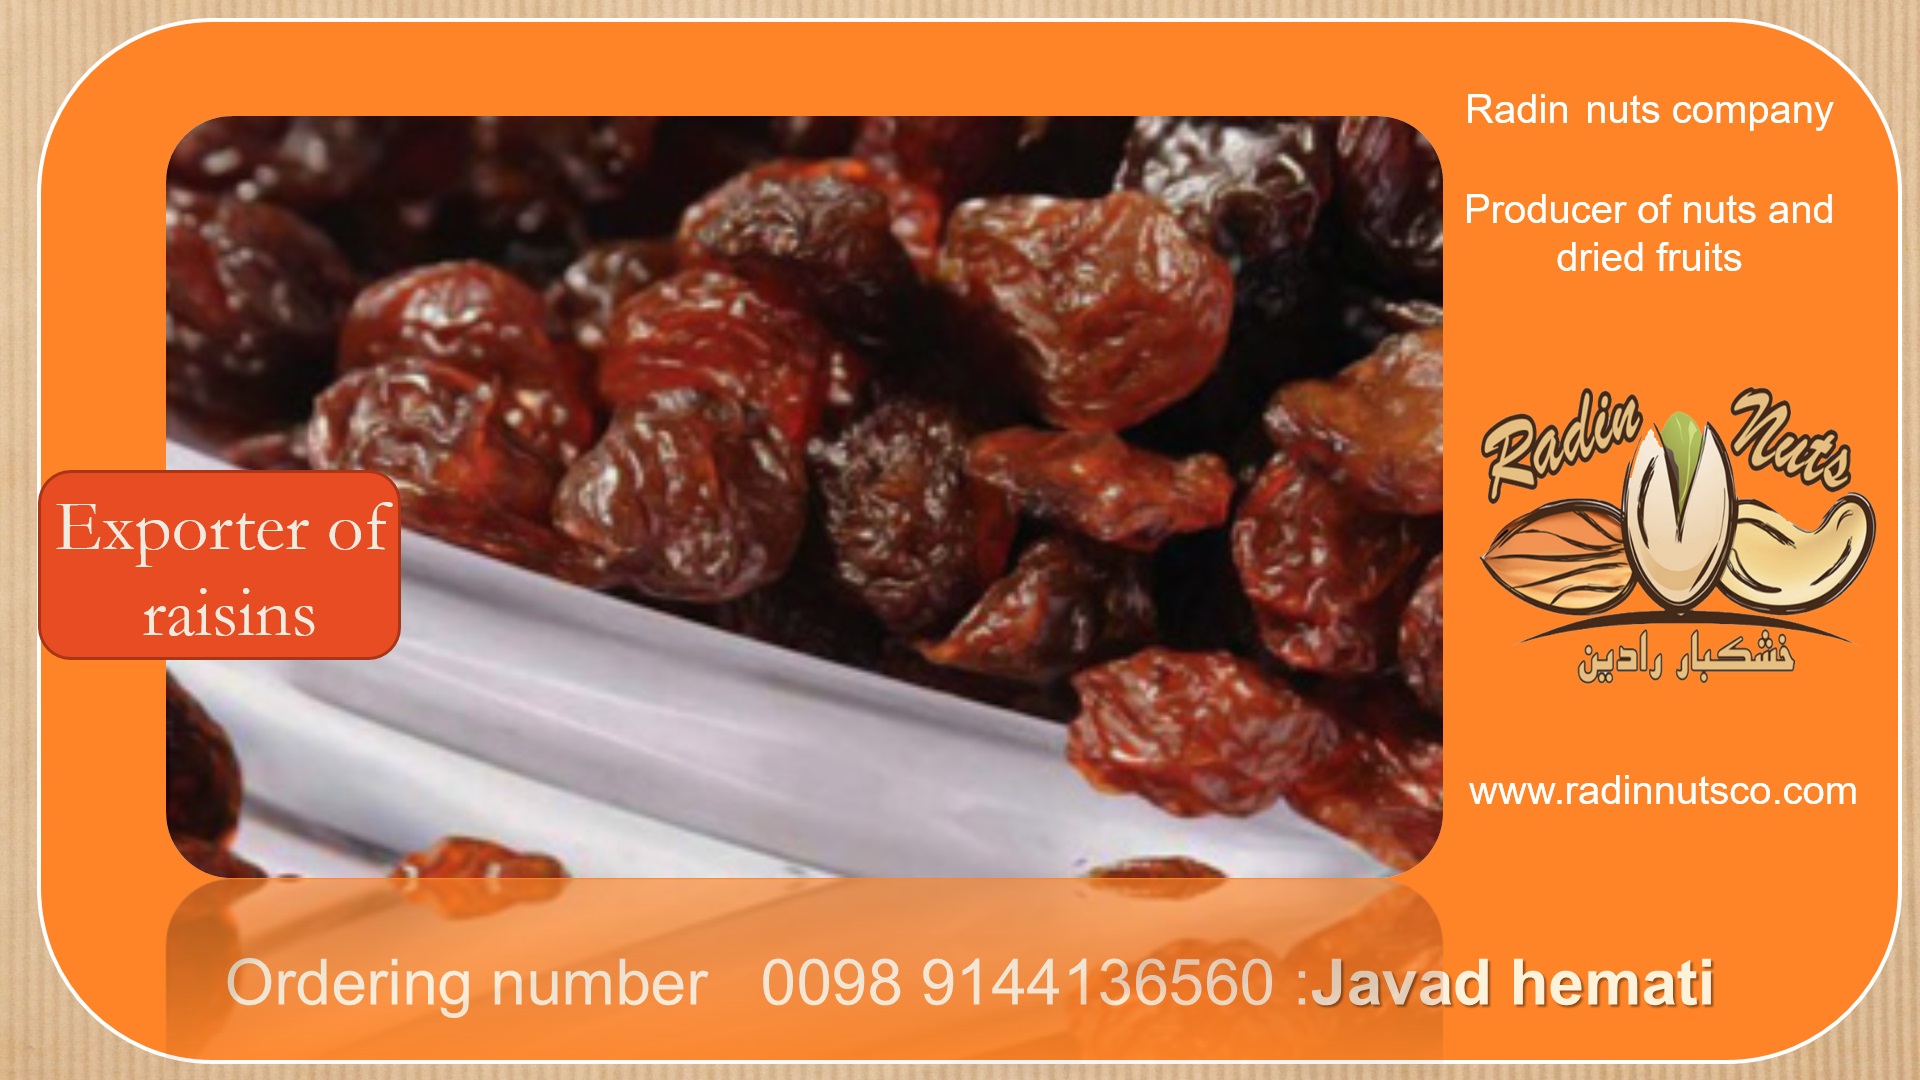 Features of raisins and their healing properties